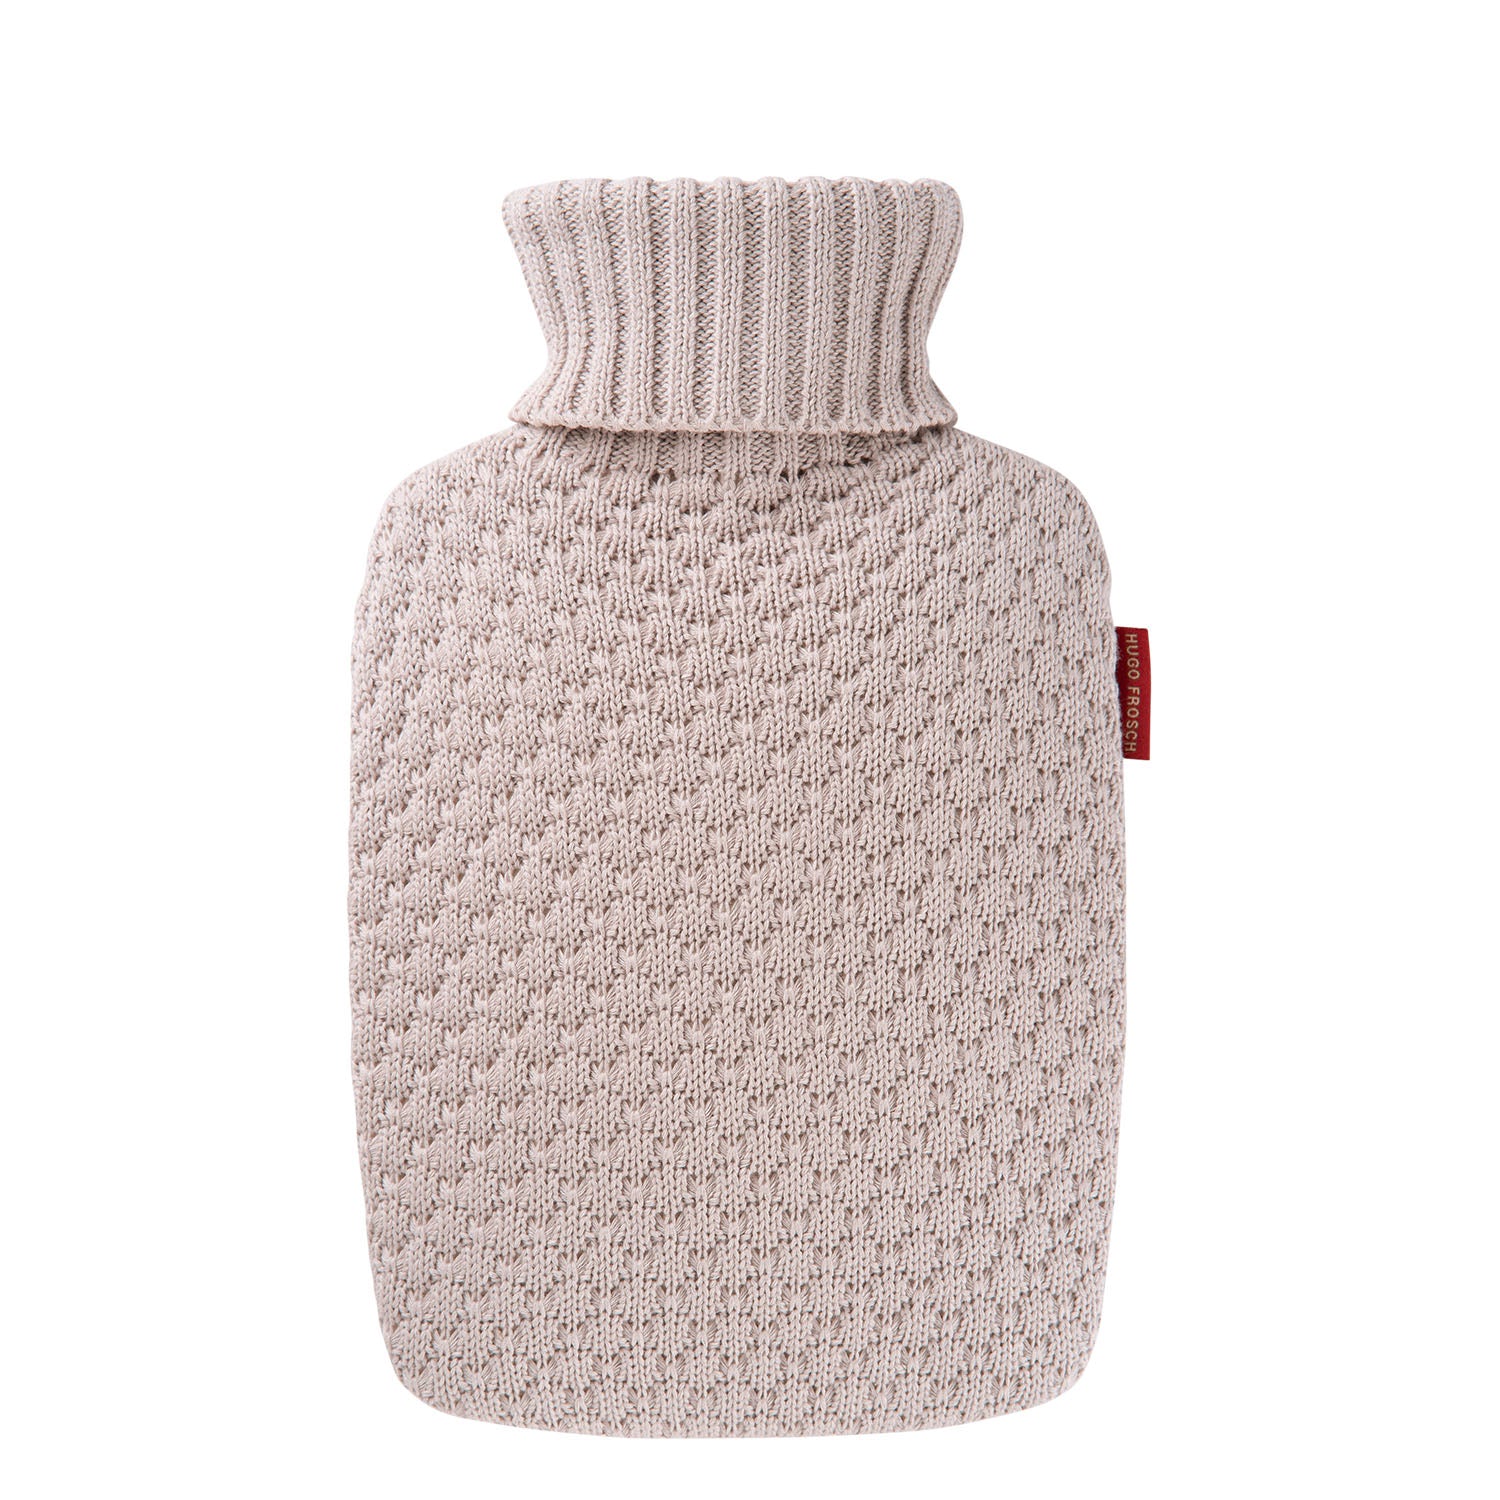 1.8 Litre Classic Plant Based Hot Water Bottle with Sand Knit Organic Cotton Cover (rubberless)